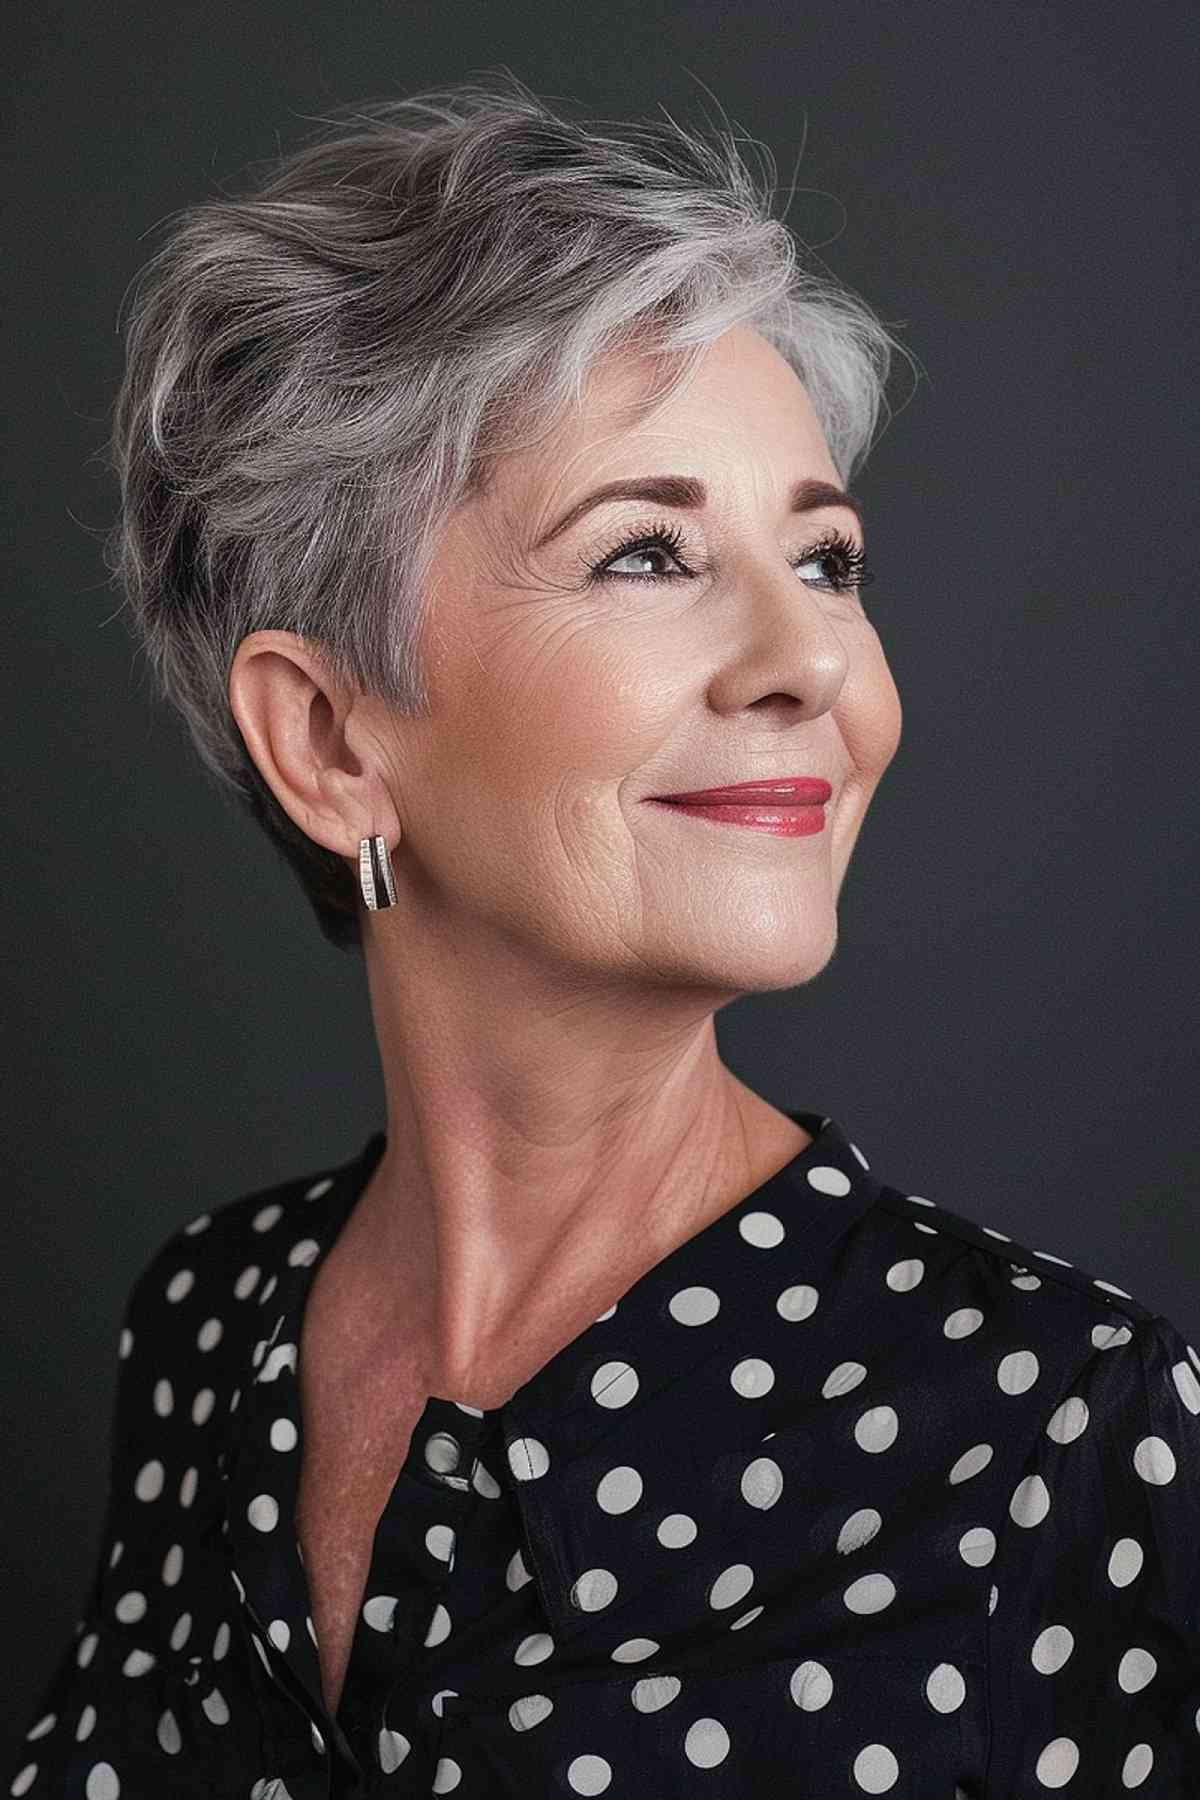 Smiling older woman with a stylish feathery pixie cut, enhancing her natural gray hair for a voluminous, youthful look, paired with a polka-dot blouse.